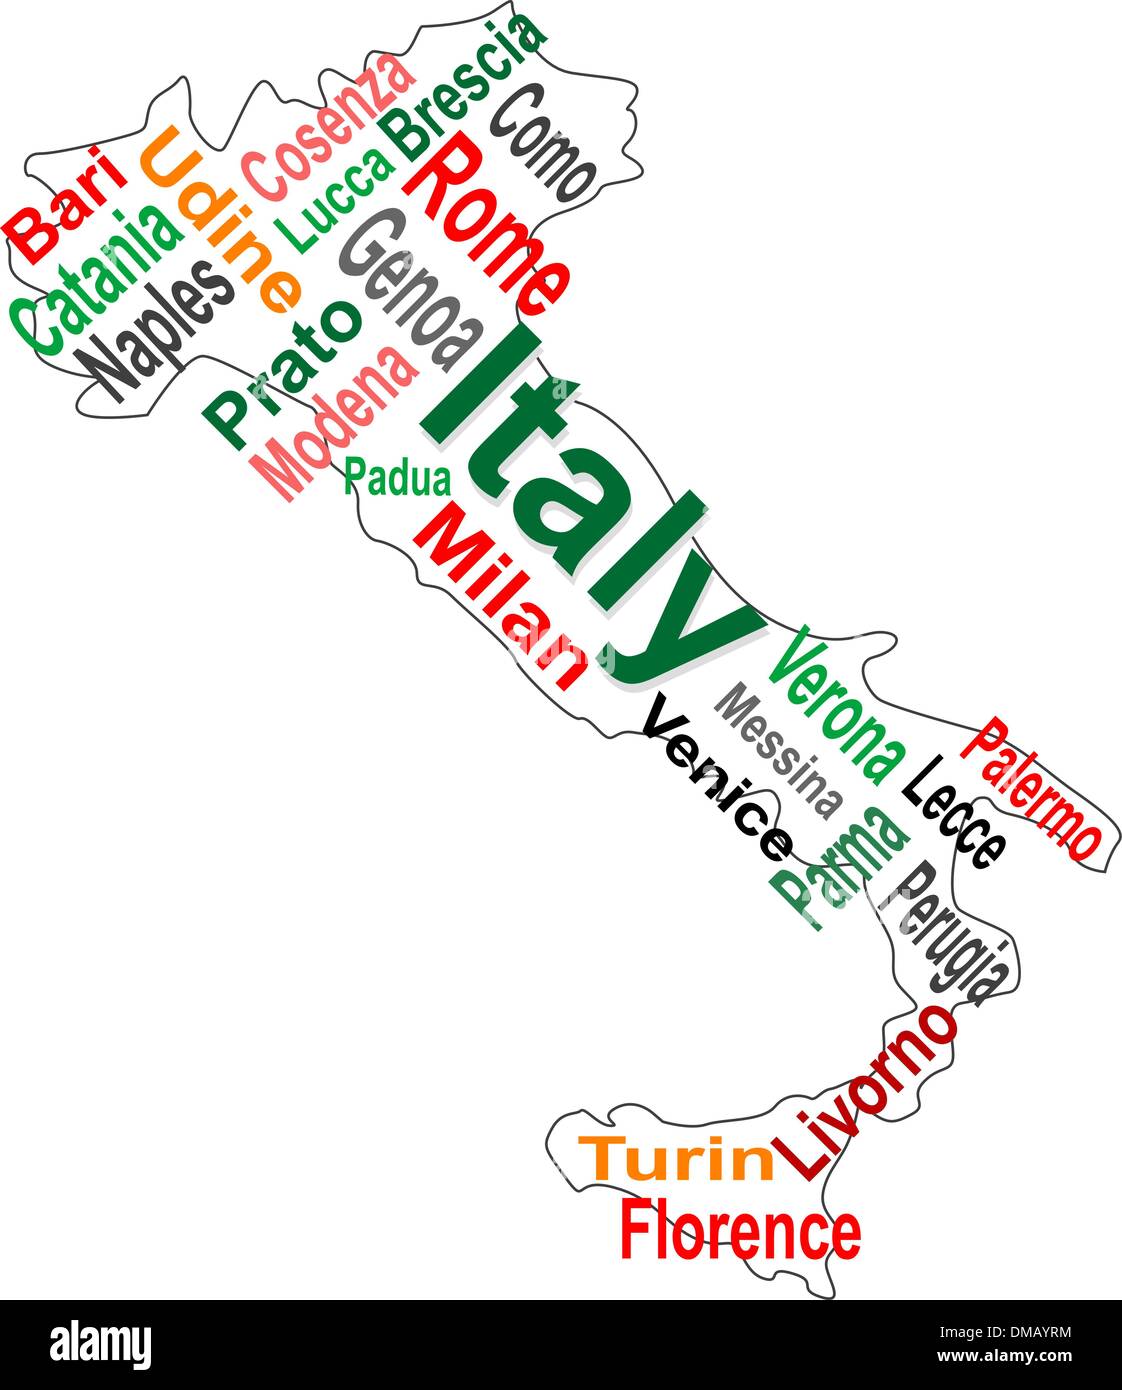 Italy map and words cloud with larger cities Stock Vector